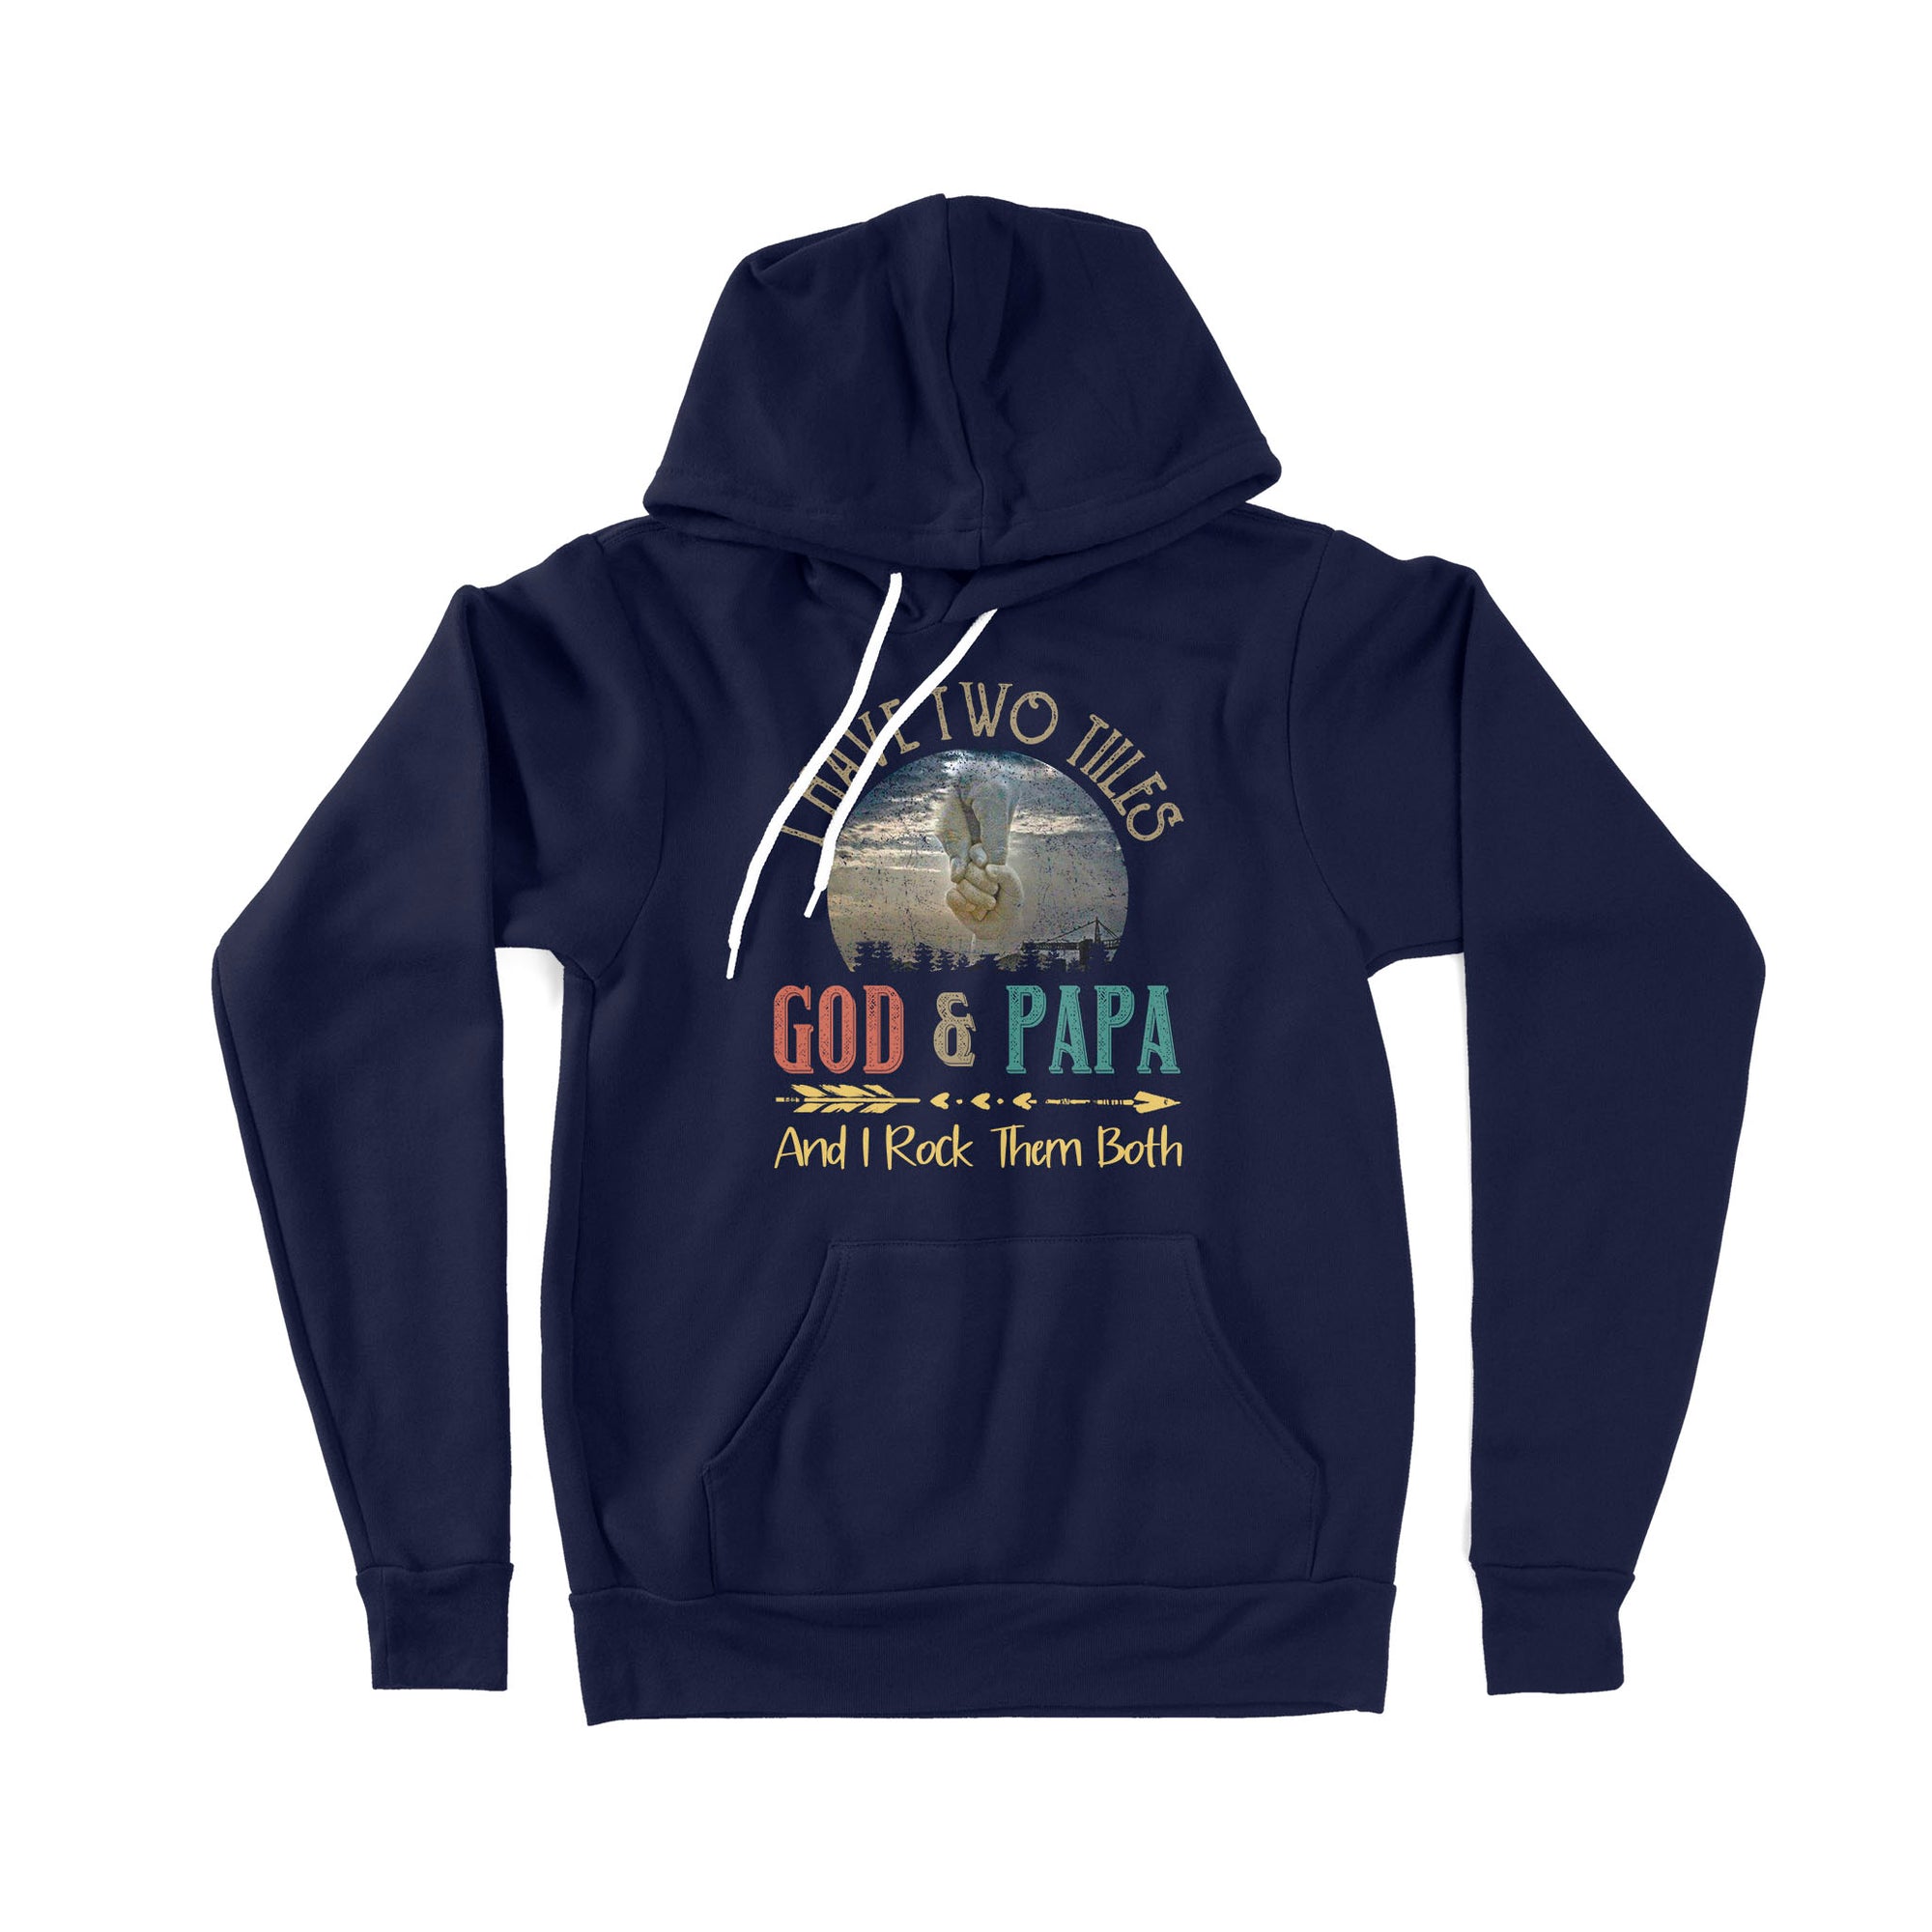 I Have Two Titles God And Papa - Premium Hoodie